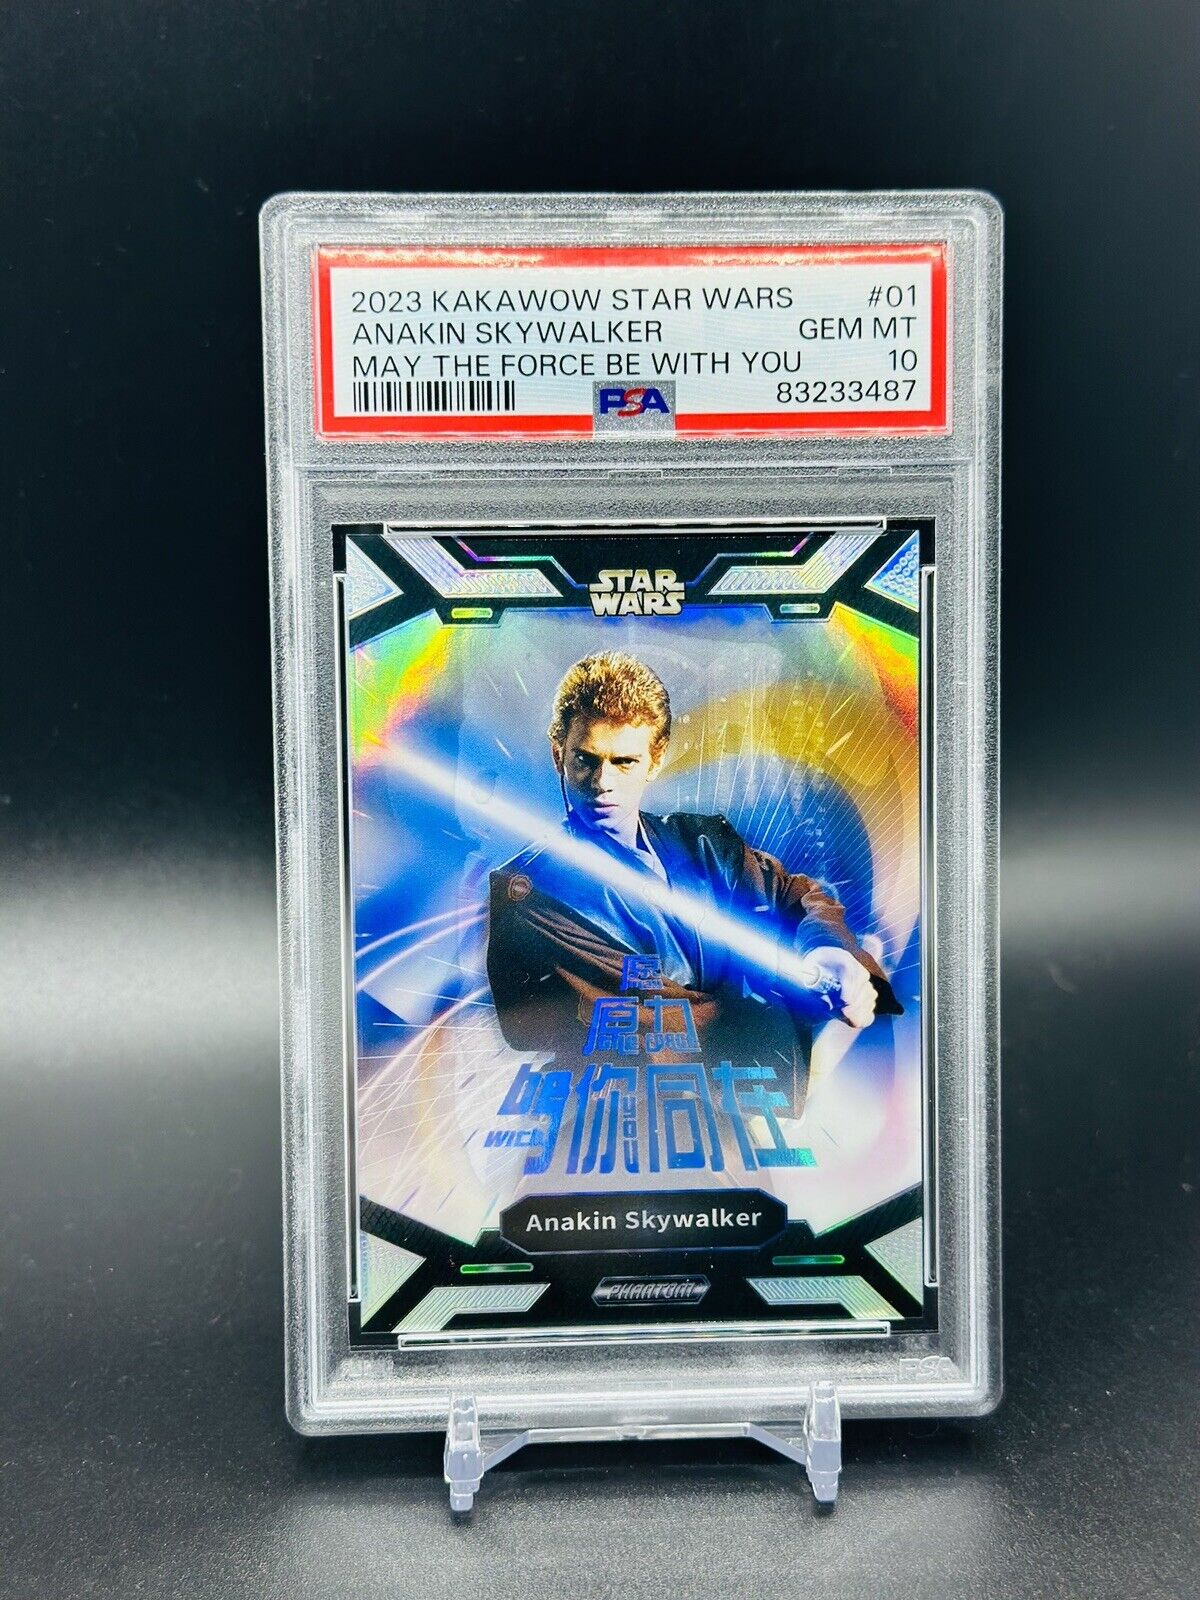 2023 Kakawow Star Wars Anakin Skywalker #1 May The Force Be With You PSA 10